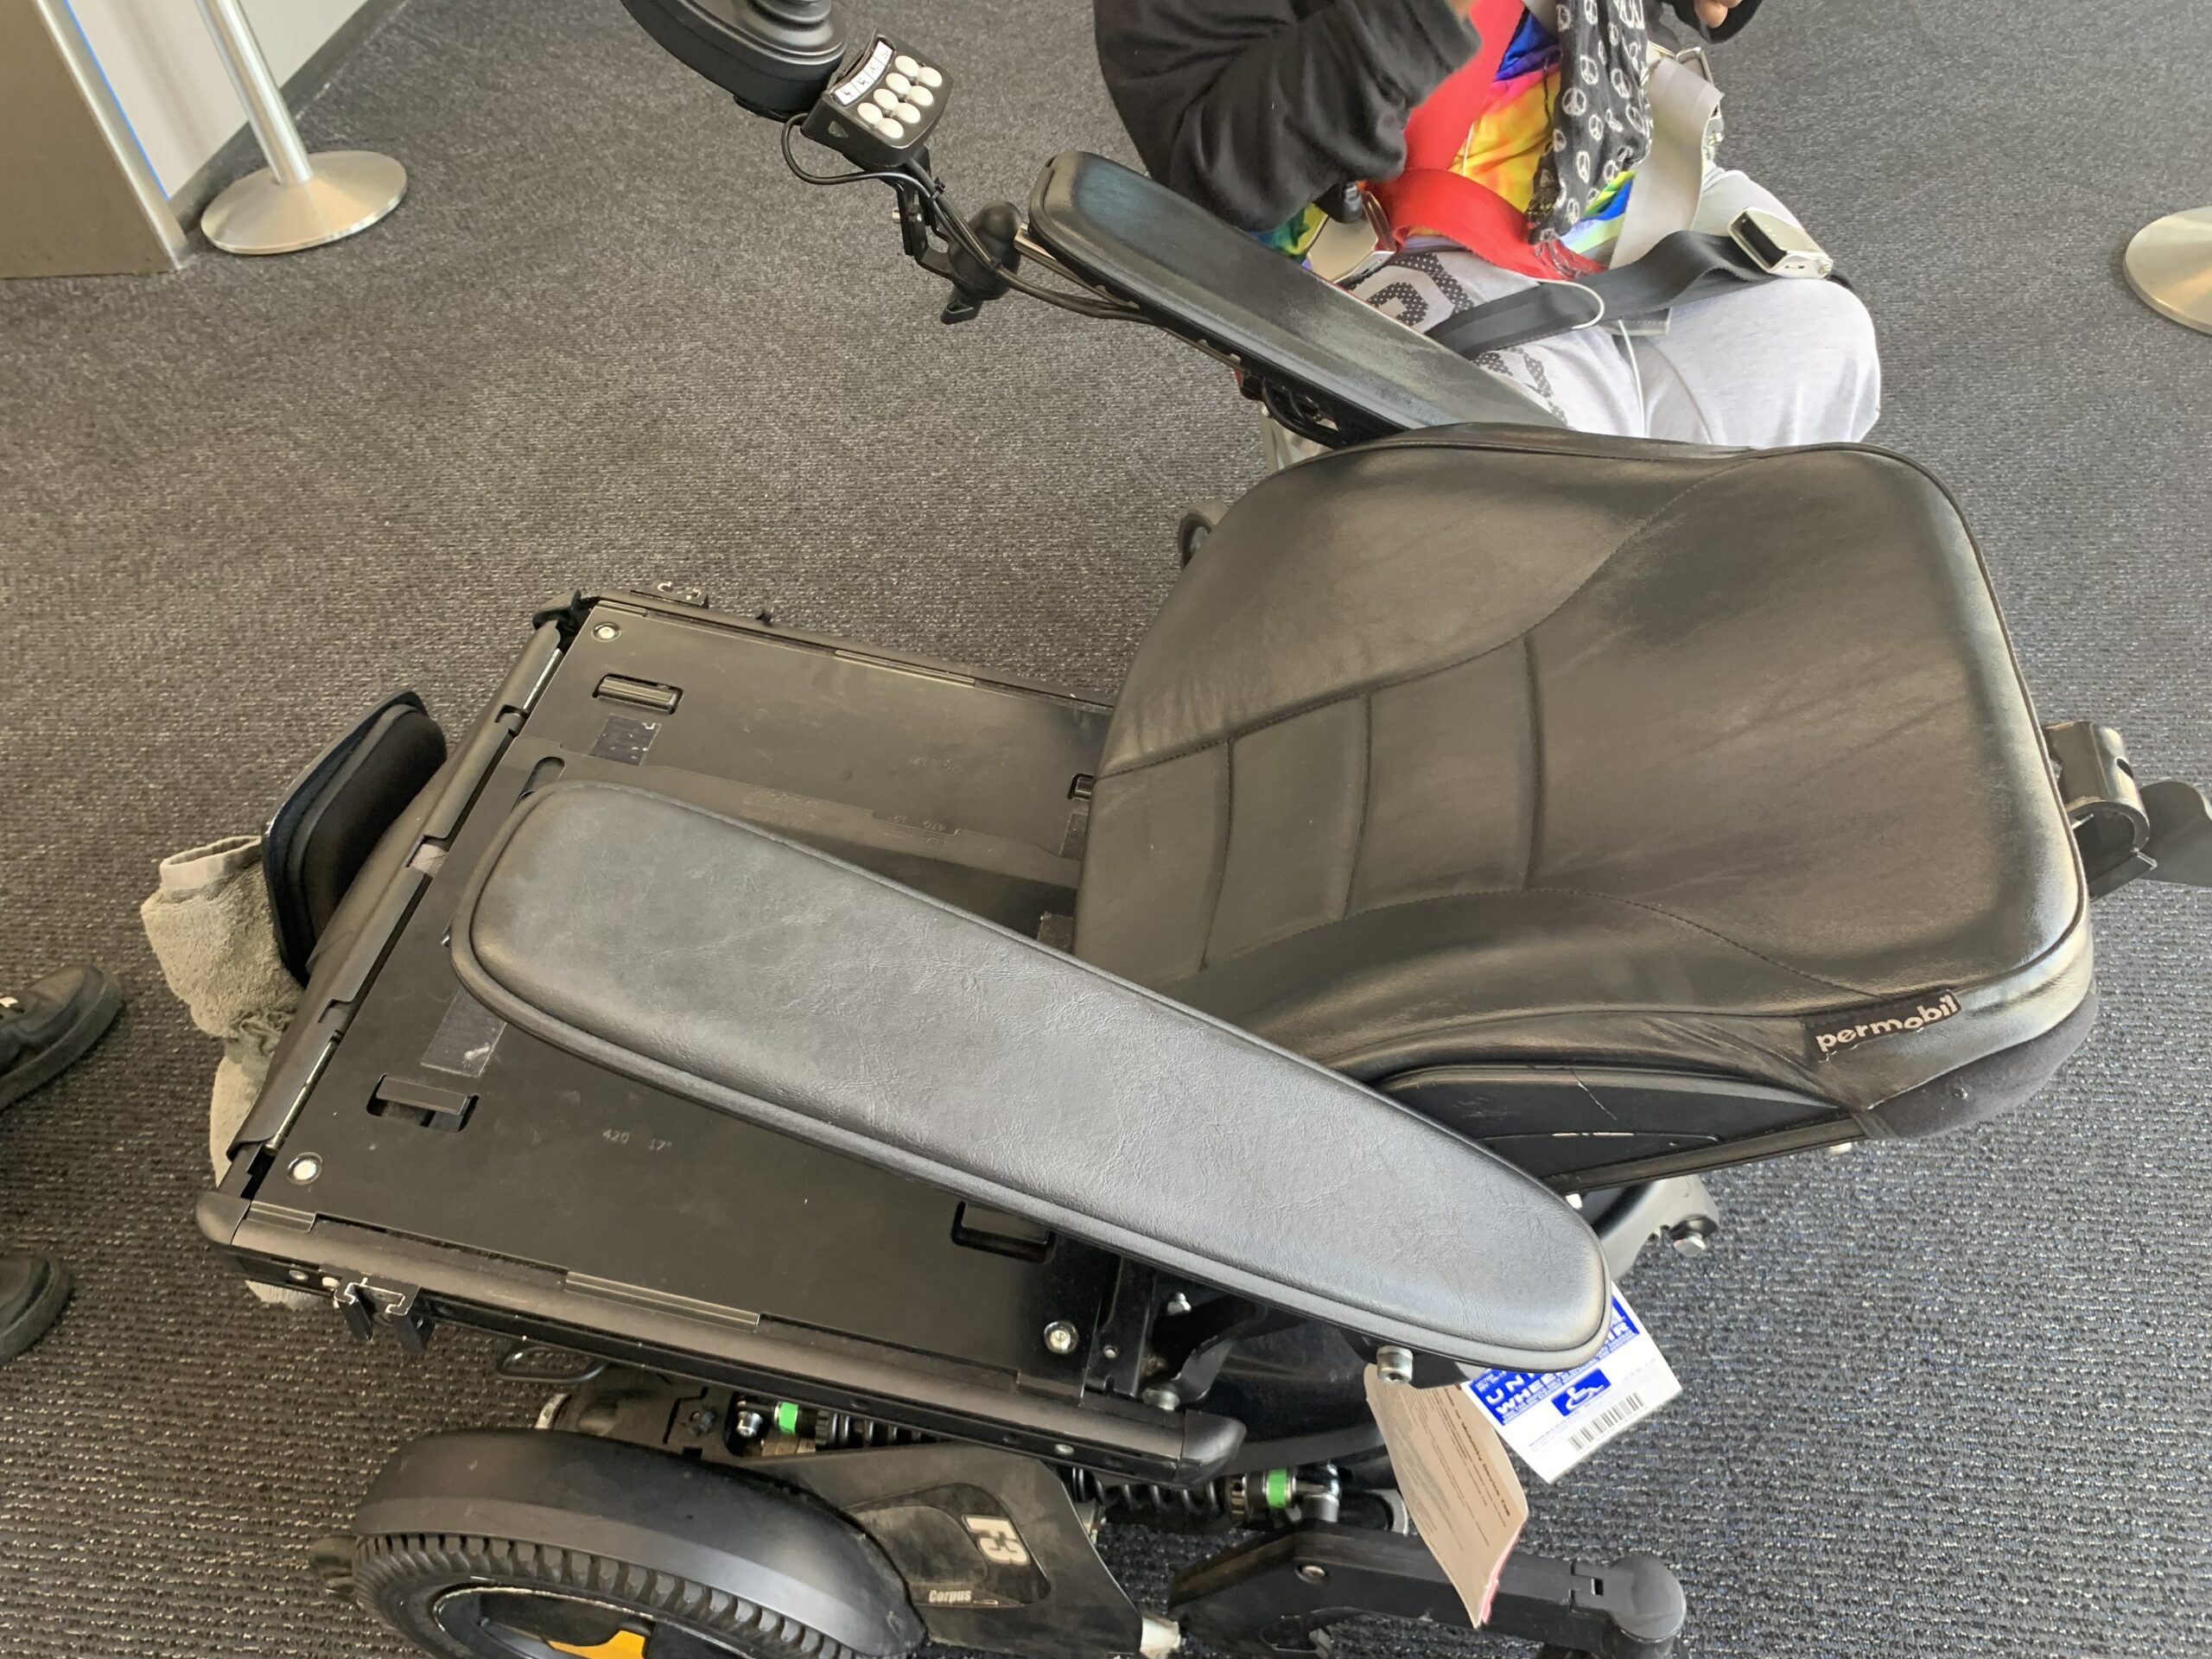 Engracia Figueroa's destroyed wheelchair sitting in airport